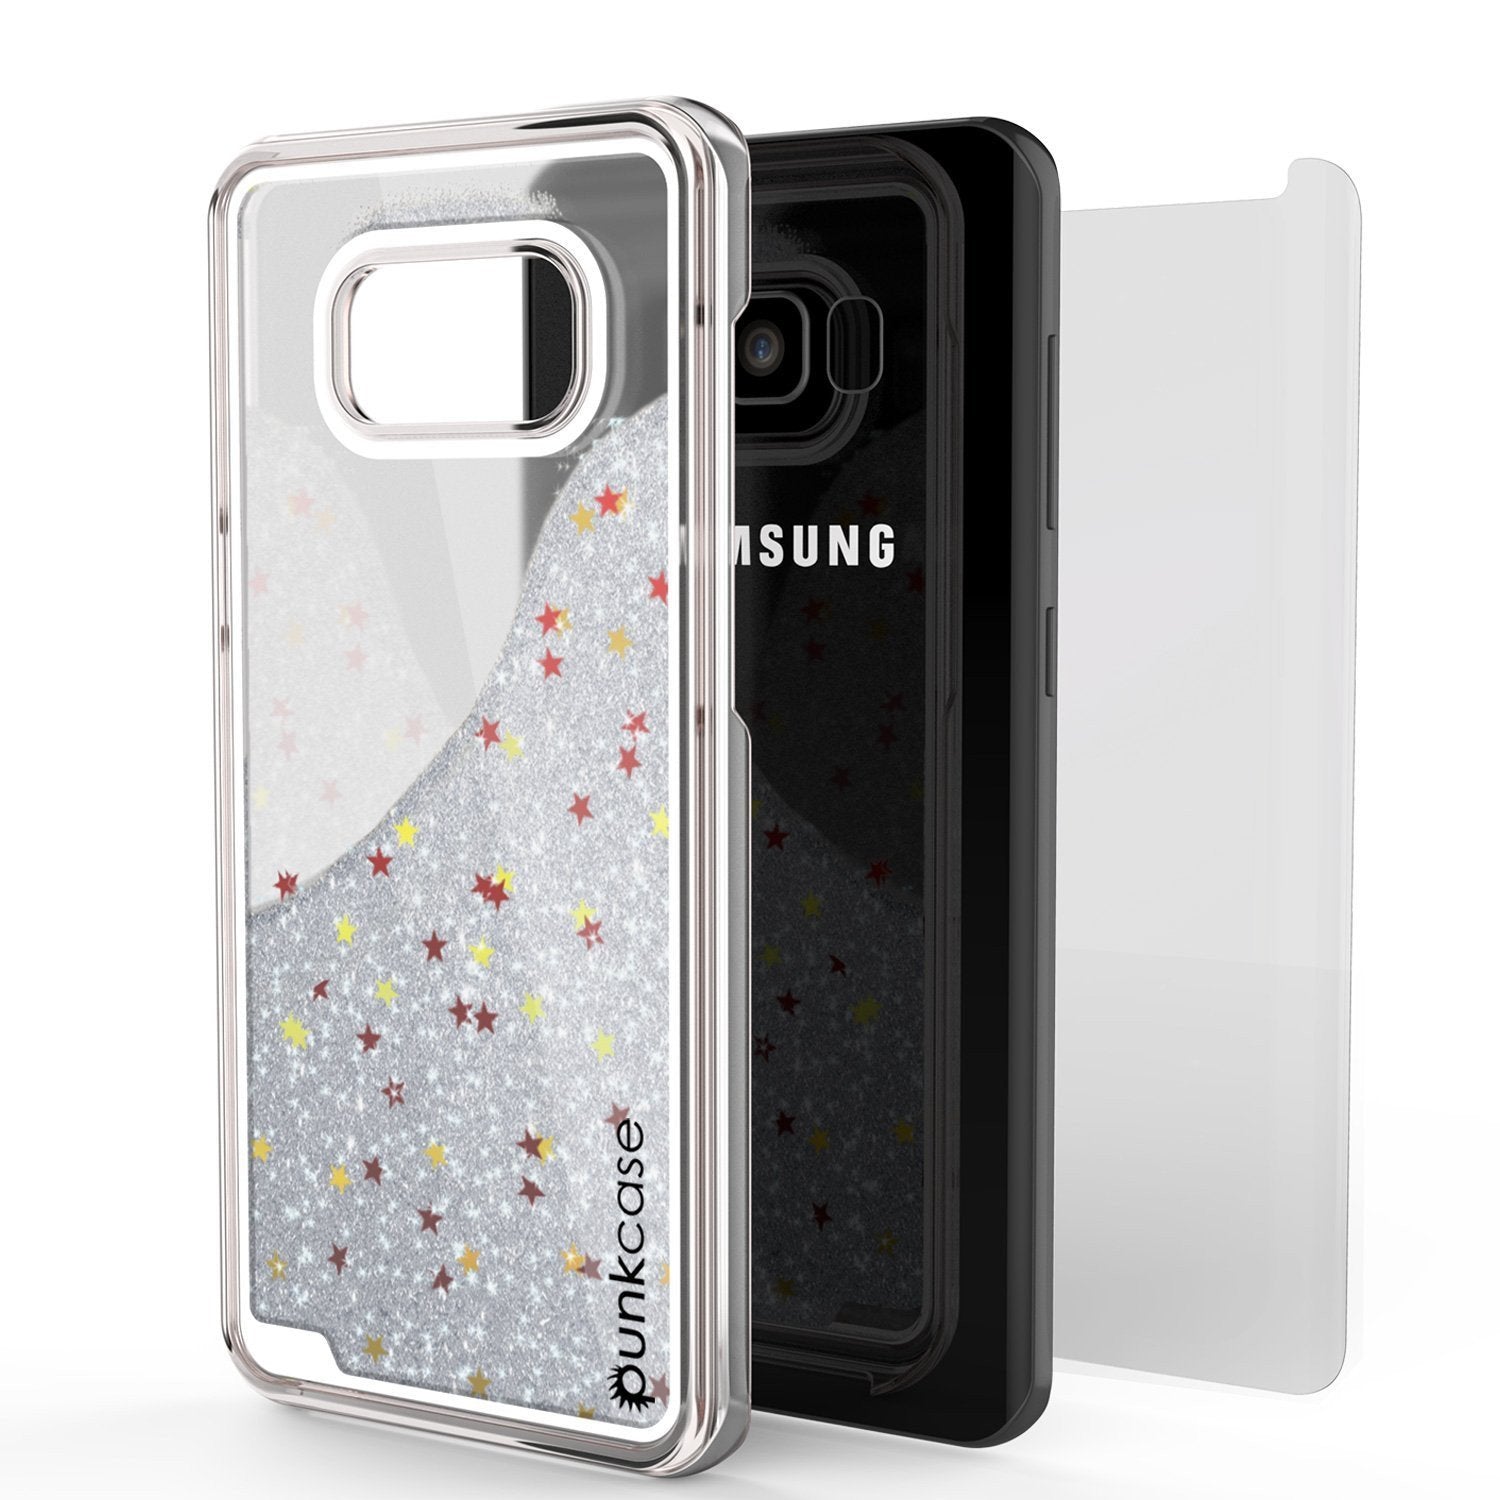 Galaxy S8 Case, Punkcase Liquid Silver Series Protective Dual Layer Floating Glitter Cover